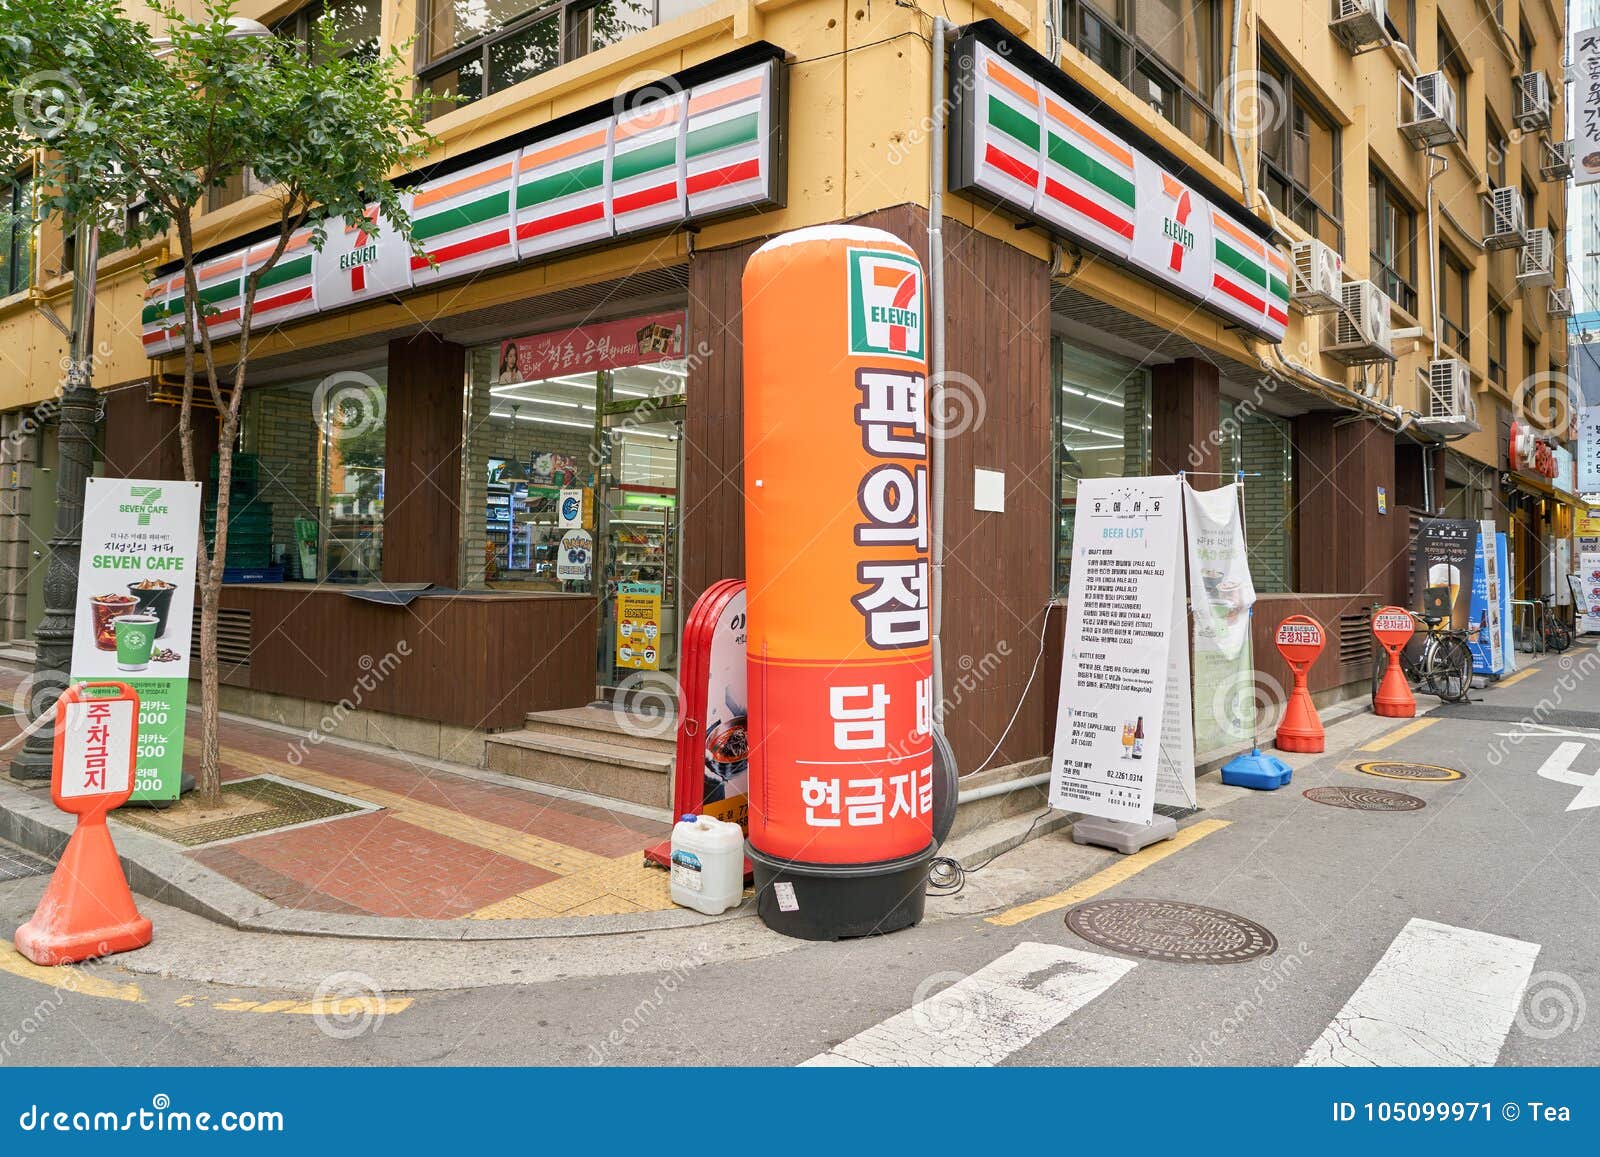  7  Eleven  convenience  store  editorial photo Image of 